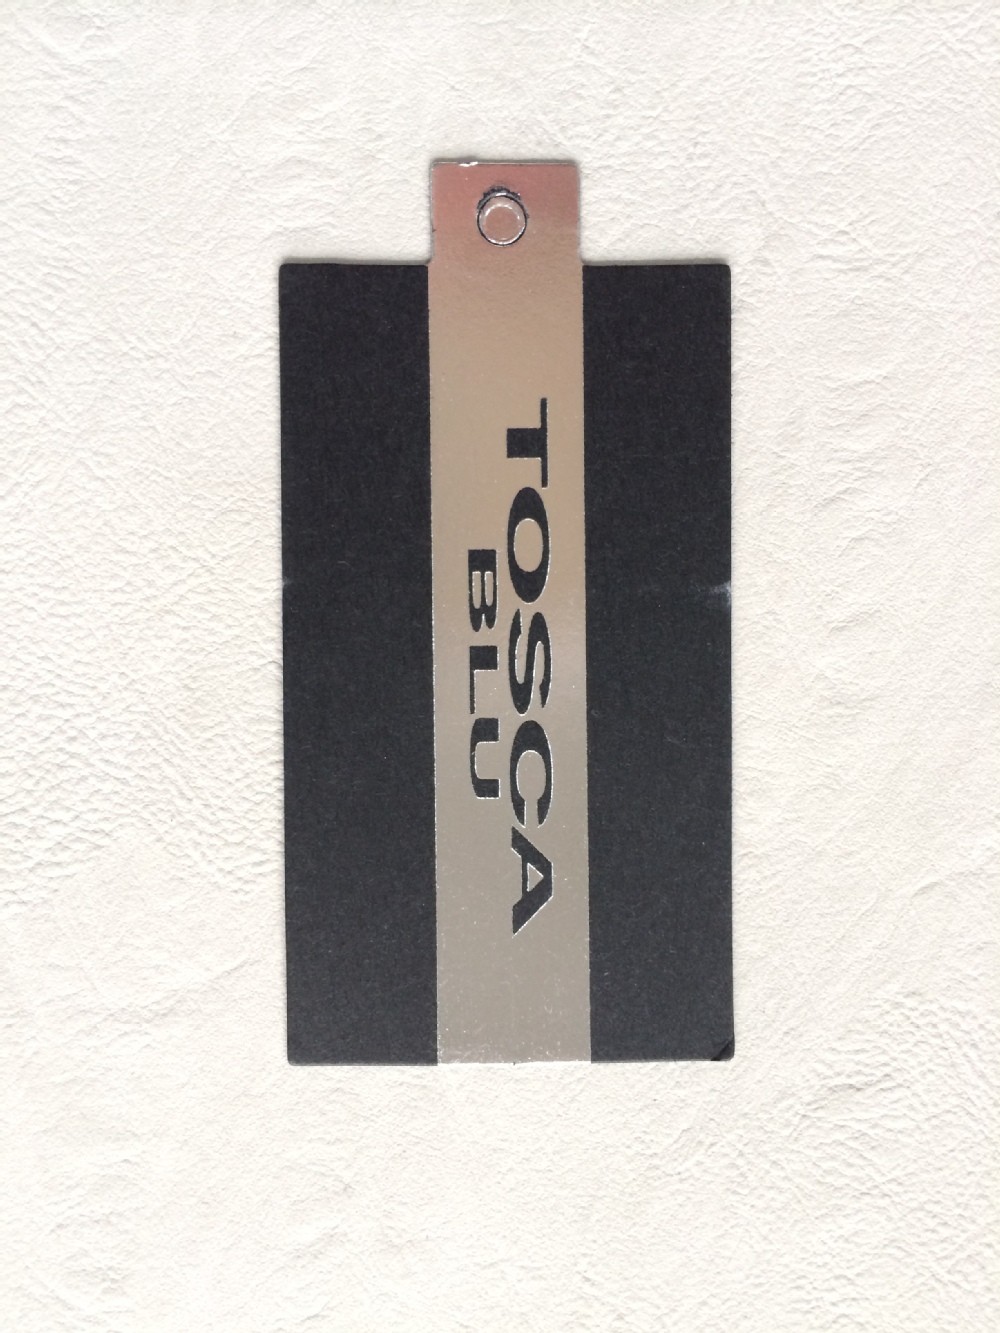 Personalized garment hang tags